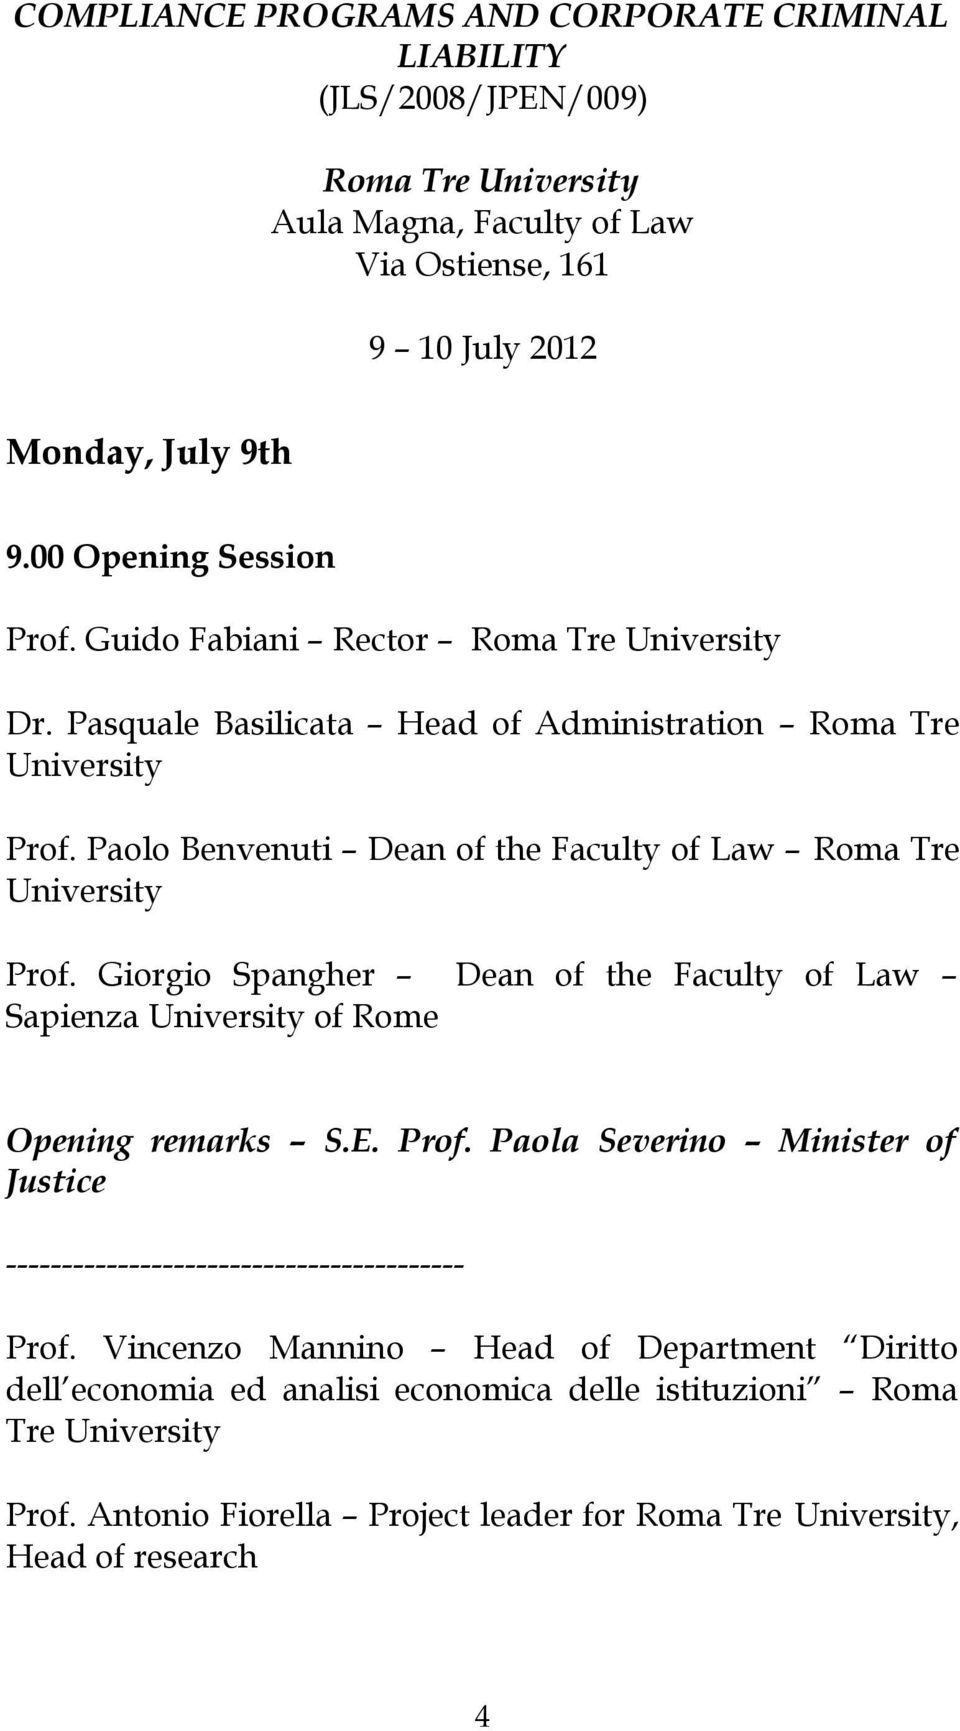 Paolo Benvenuti Dean of the Faculty of Law Roma Tre University Prof. Giorgio Spangher Dean of the Faculty of Law Sapienza University of Rome Opening remarks S.E. Prof. Paola Severino Minister of Justice ----------------------------------------- Prof.